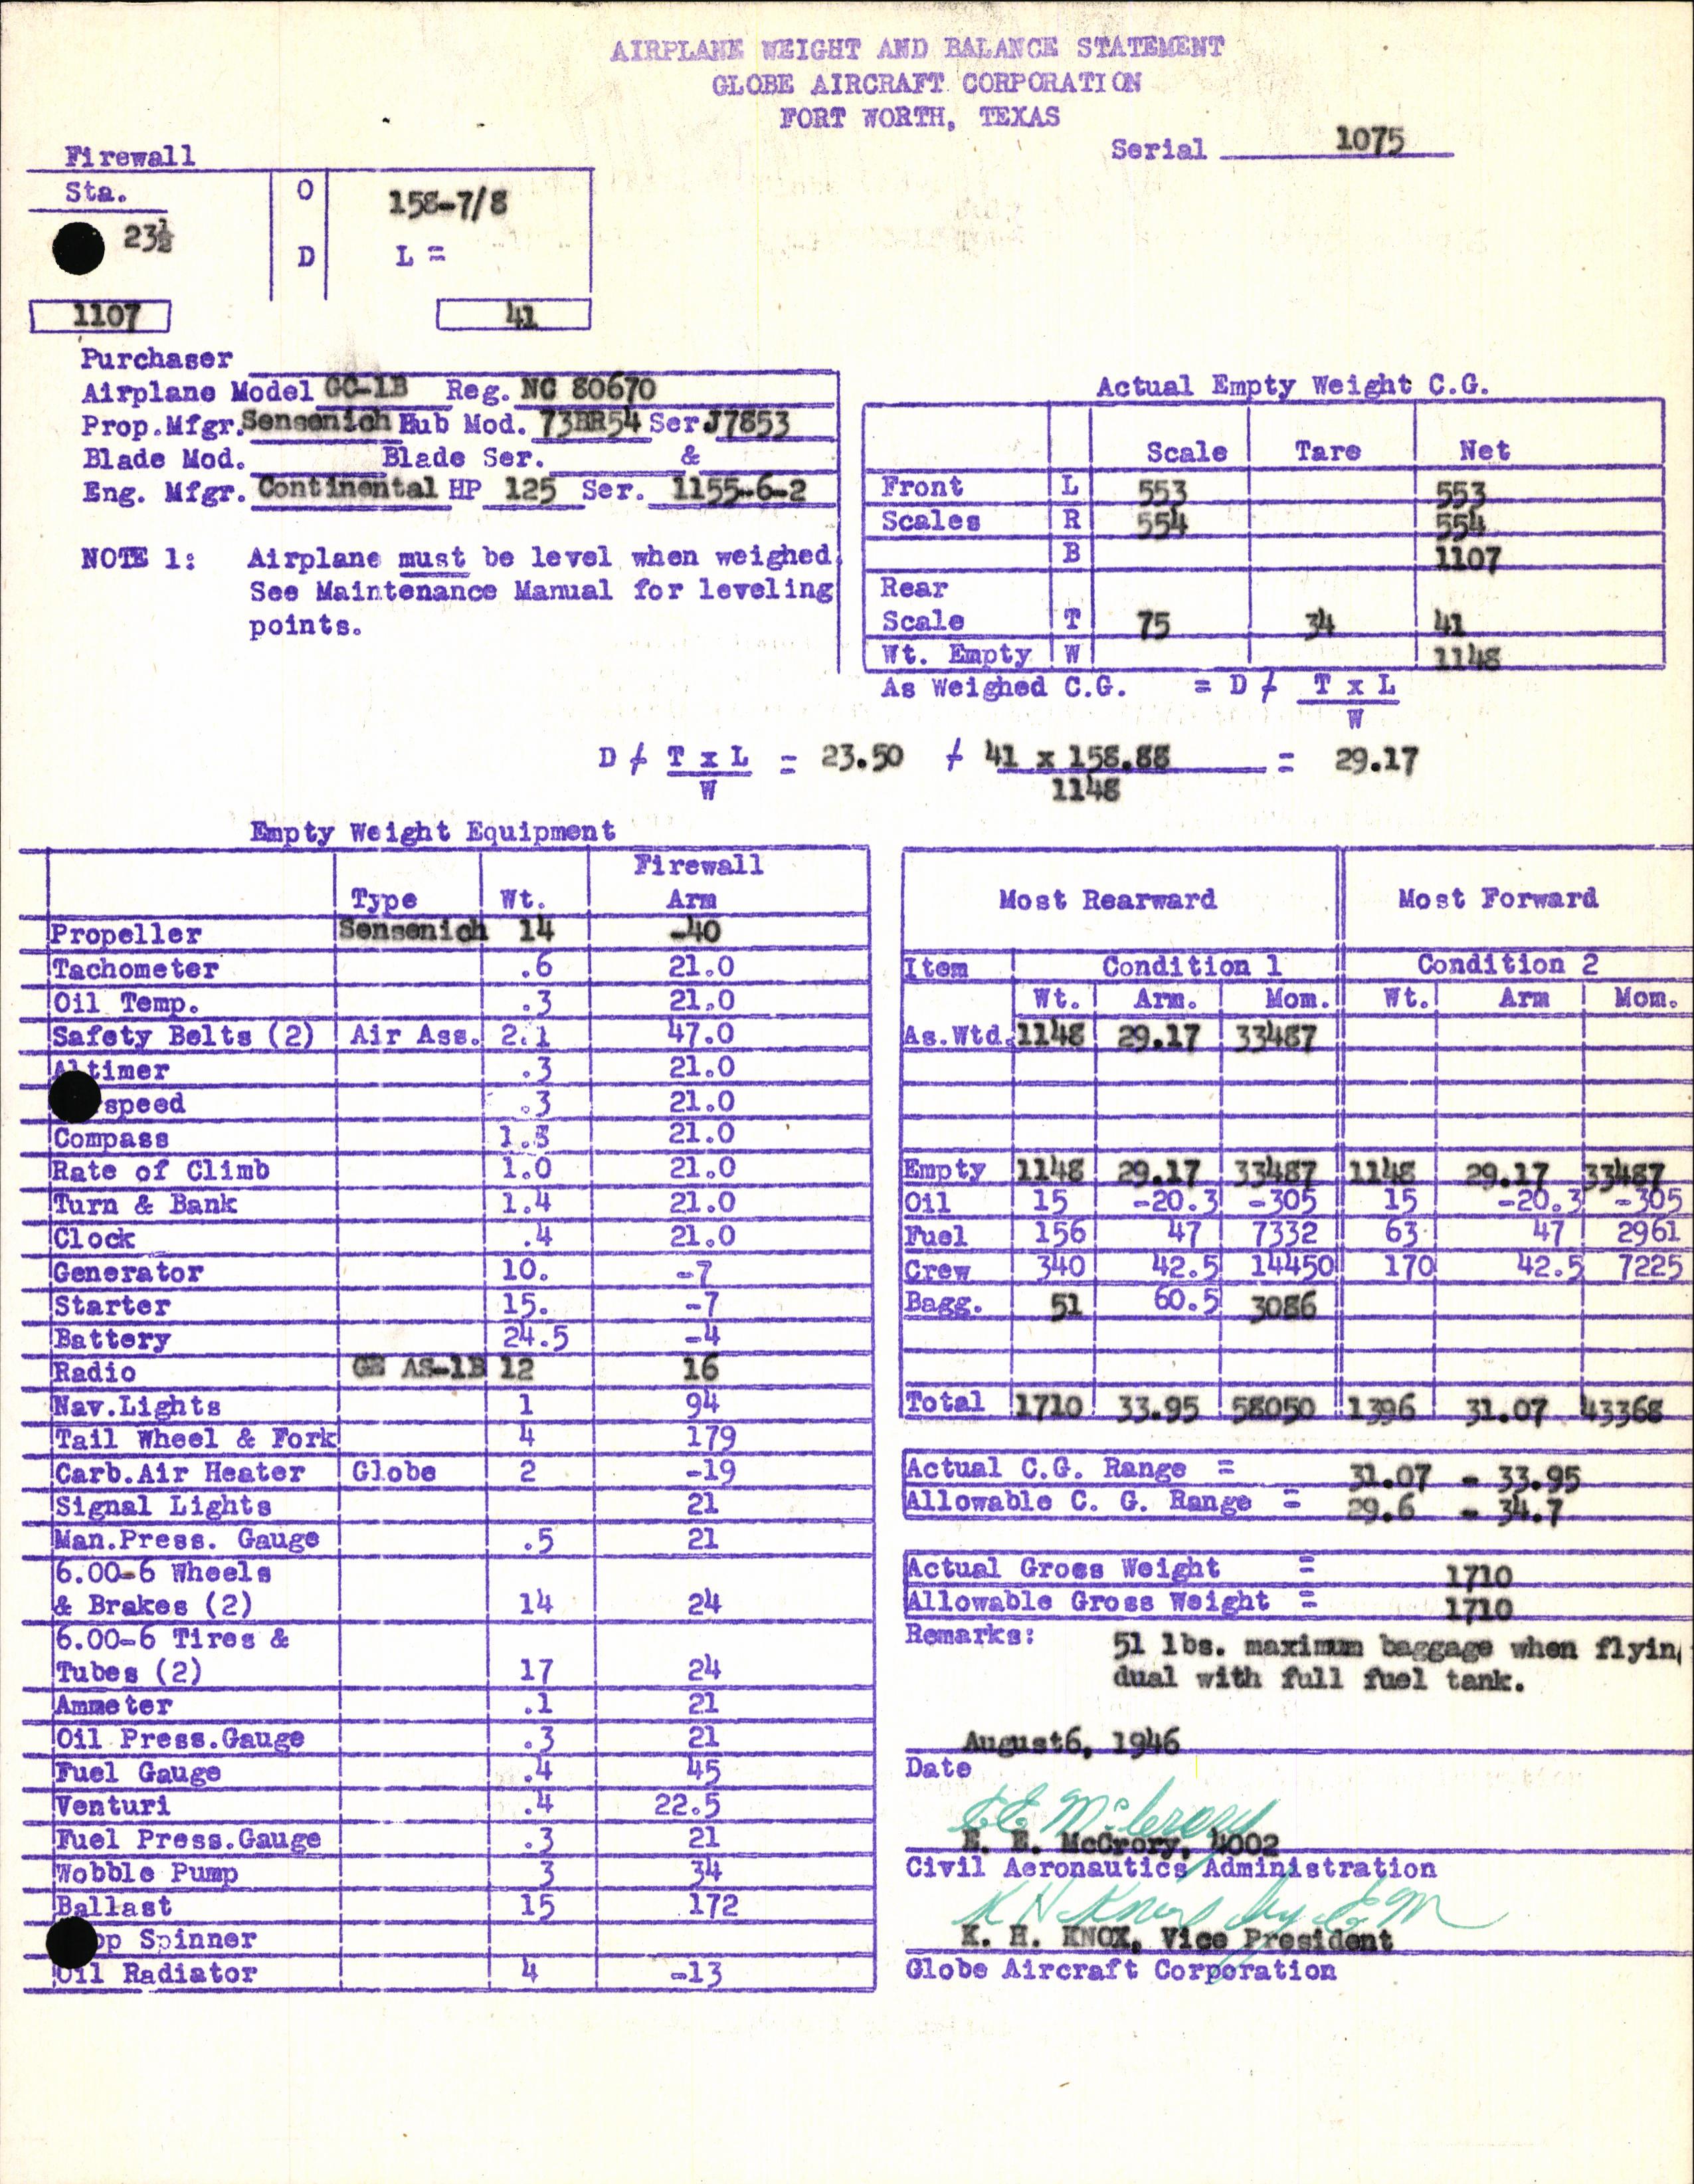 Sample page 7 from AirCorps Library document: Technical Information for Serial Number 1075